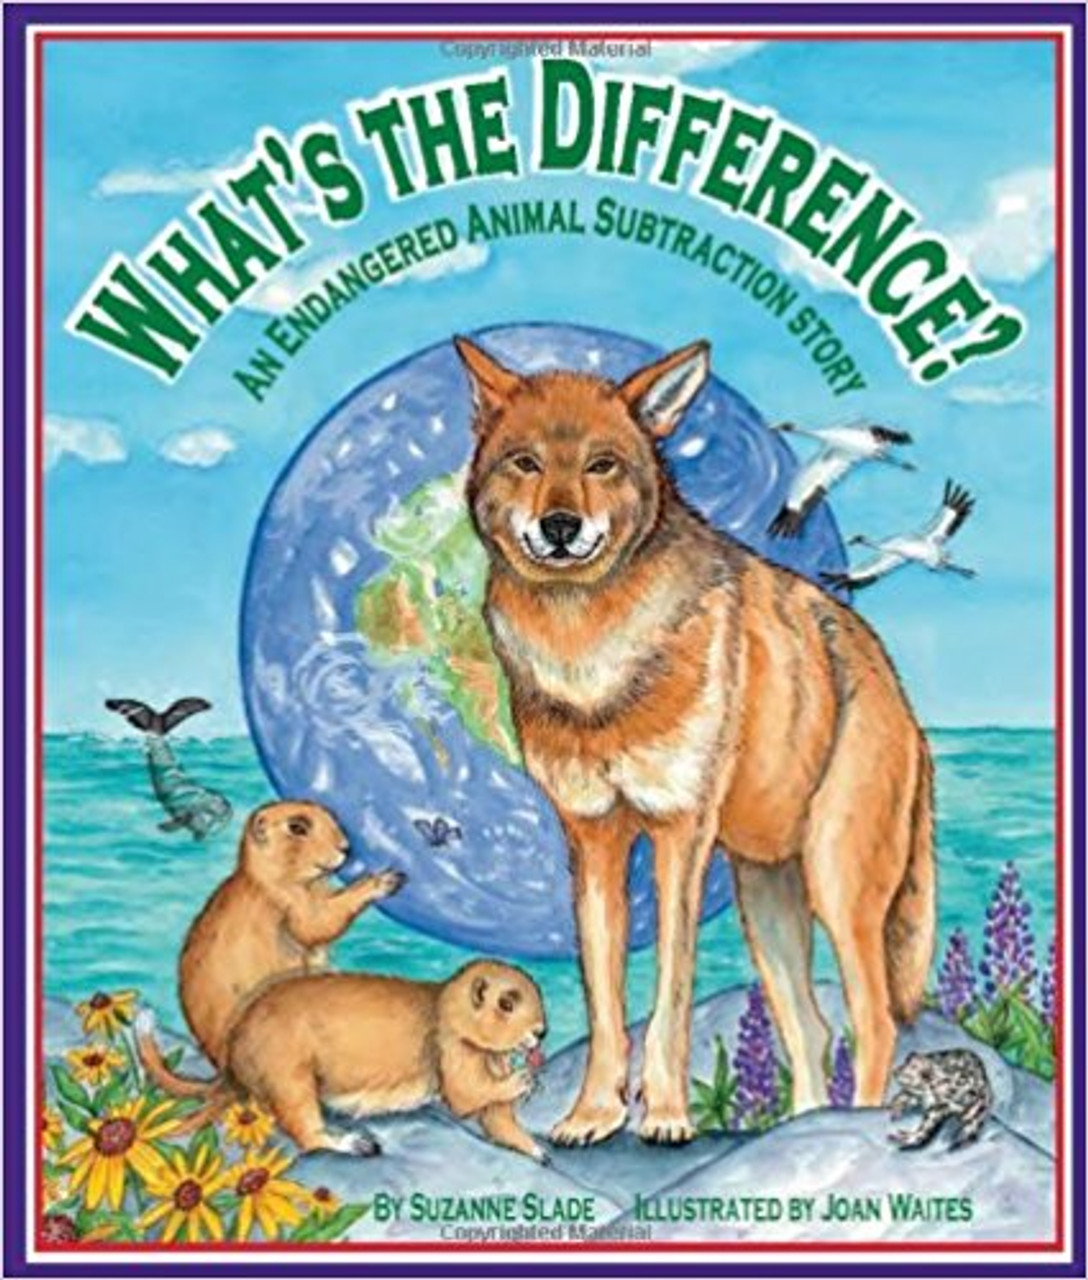 What's the Difference? by Suzanne Slade